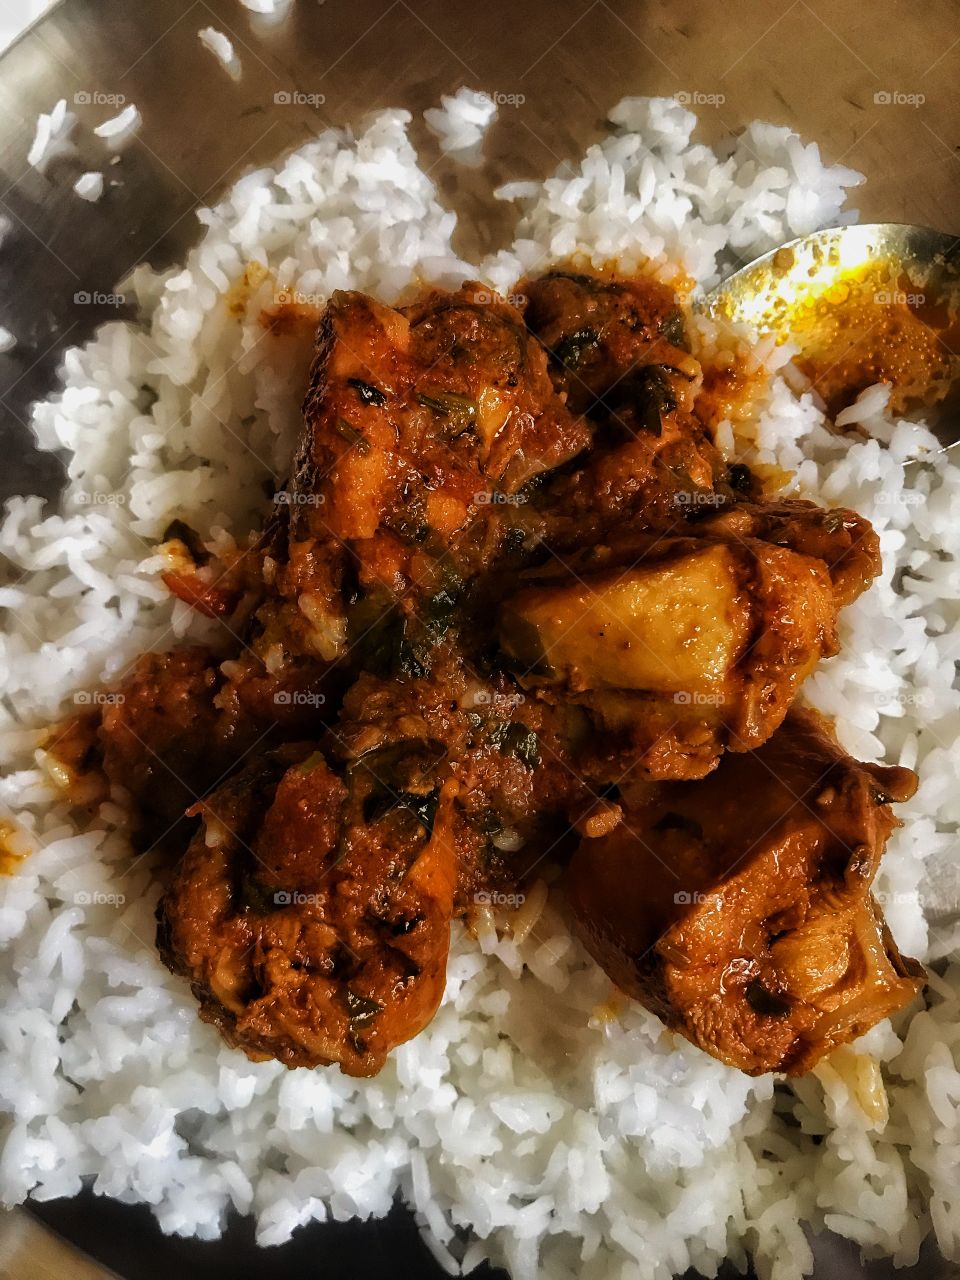 Chicken curry with rice is the way to life